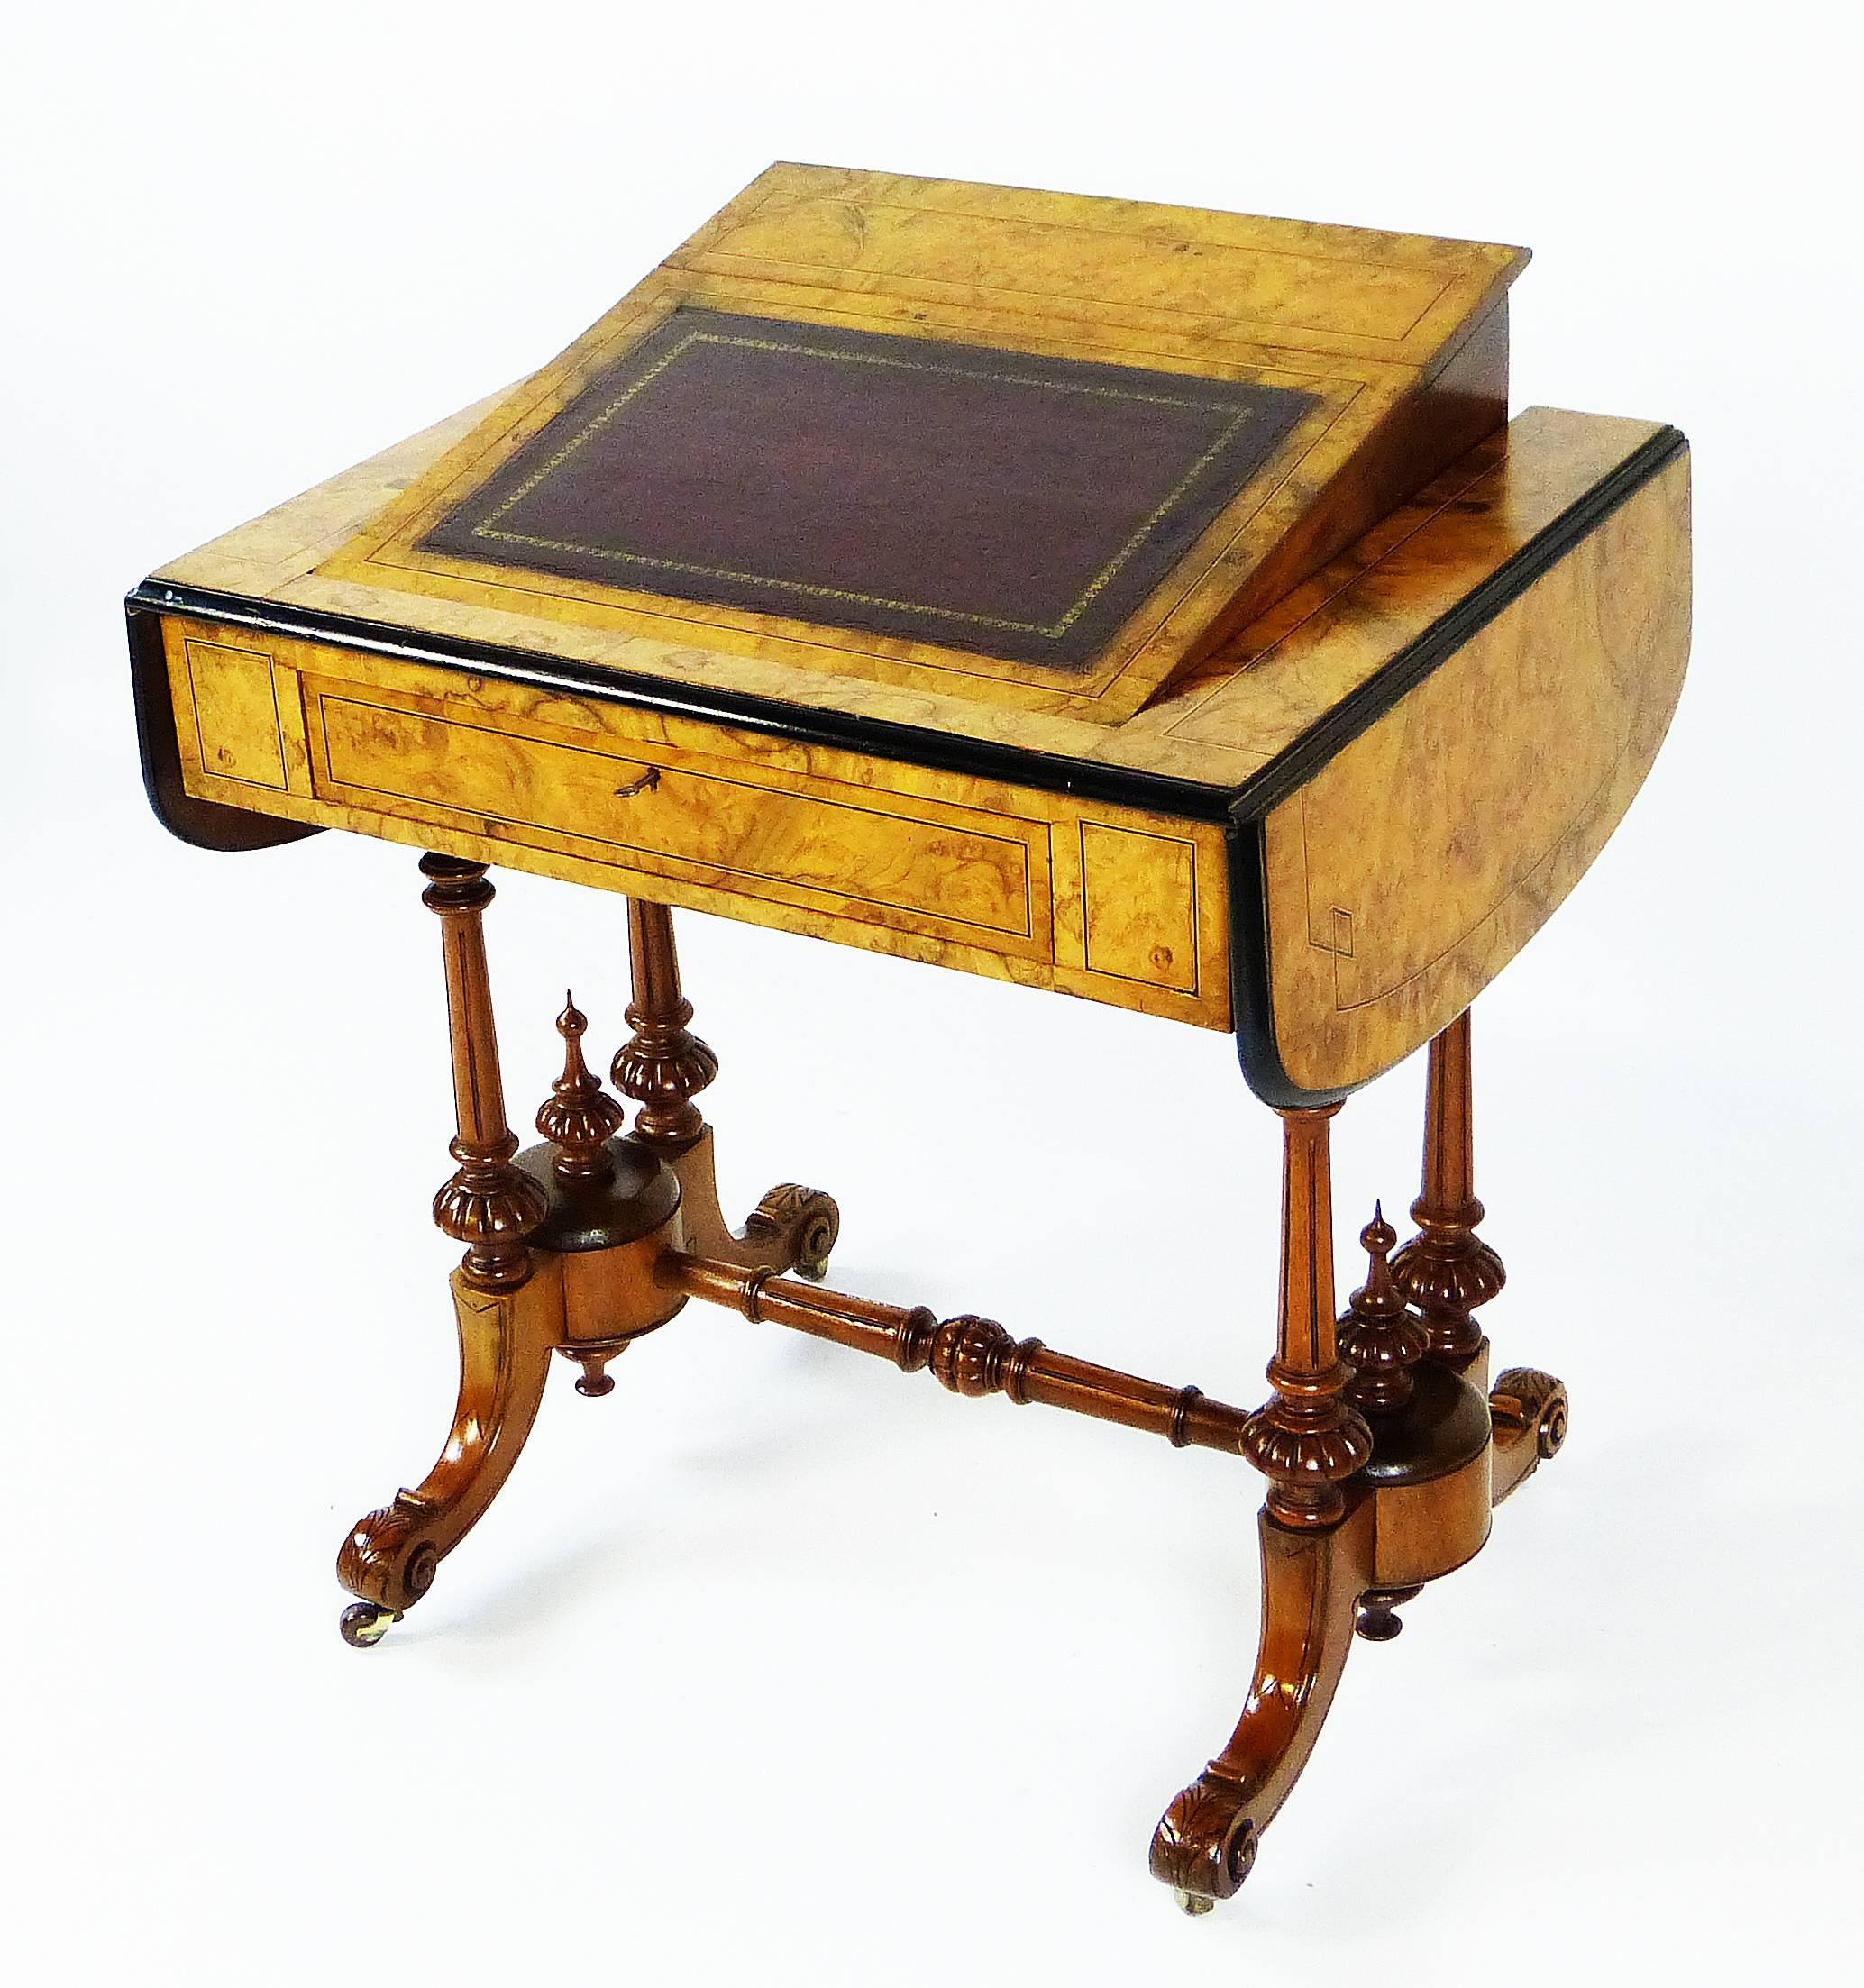 Fine quality small desk of the Victorian era with rising leather lined lectern centre section with an impeccable Davenport type stationery compartment and two side leaves that stay horizontal by the use of two finely carved supports on each side.